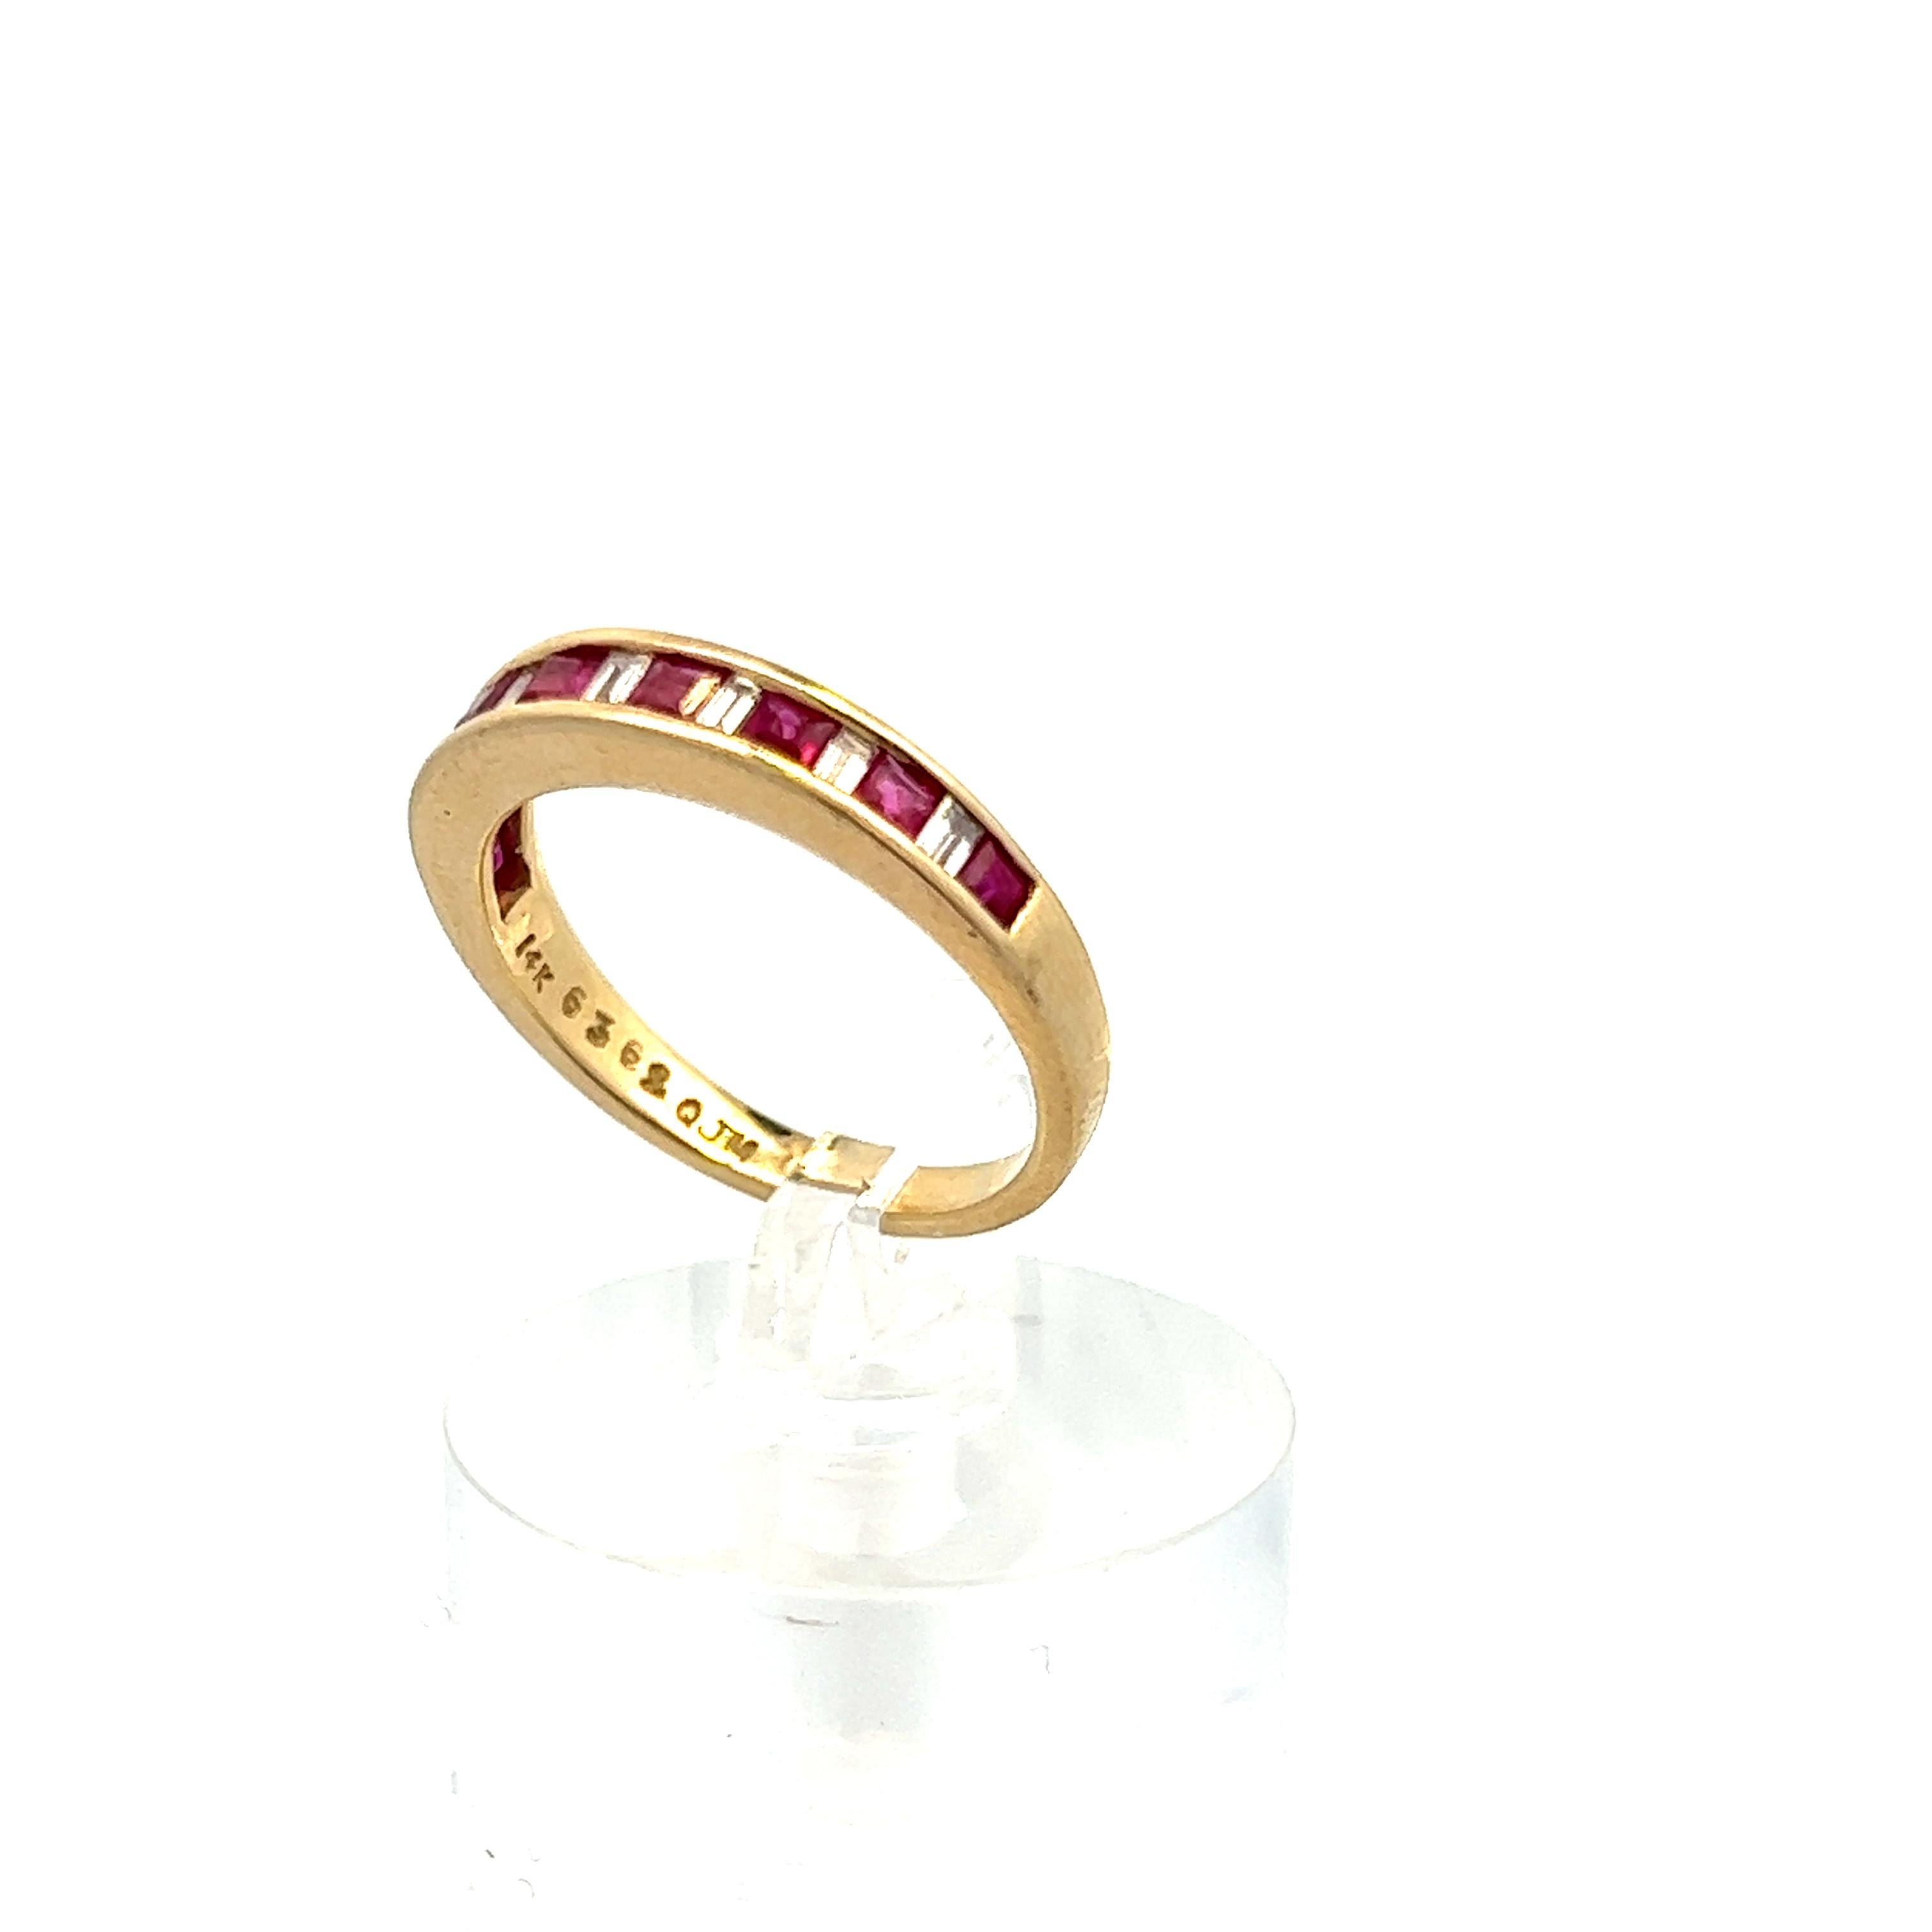 This stunning contemporary band is made with gold and red ruby and diamond. The rings unique and distinctive look comes from the ruby and diamond alternating design. Adding to the uniqueness, the ruby is square cut and the diamond is baguette cut,